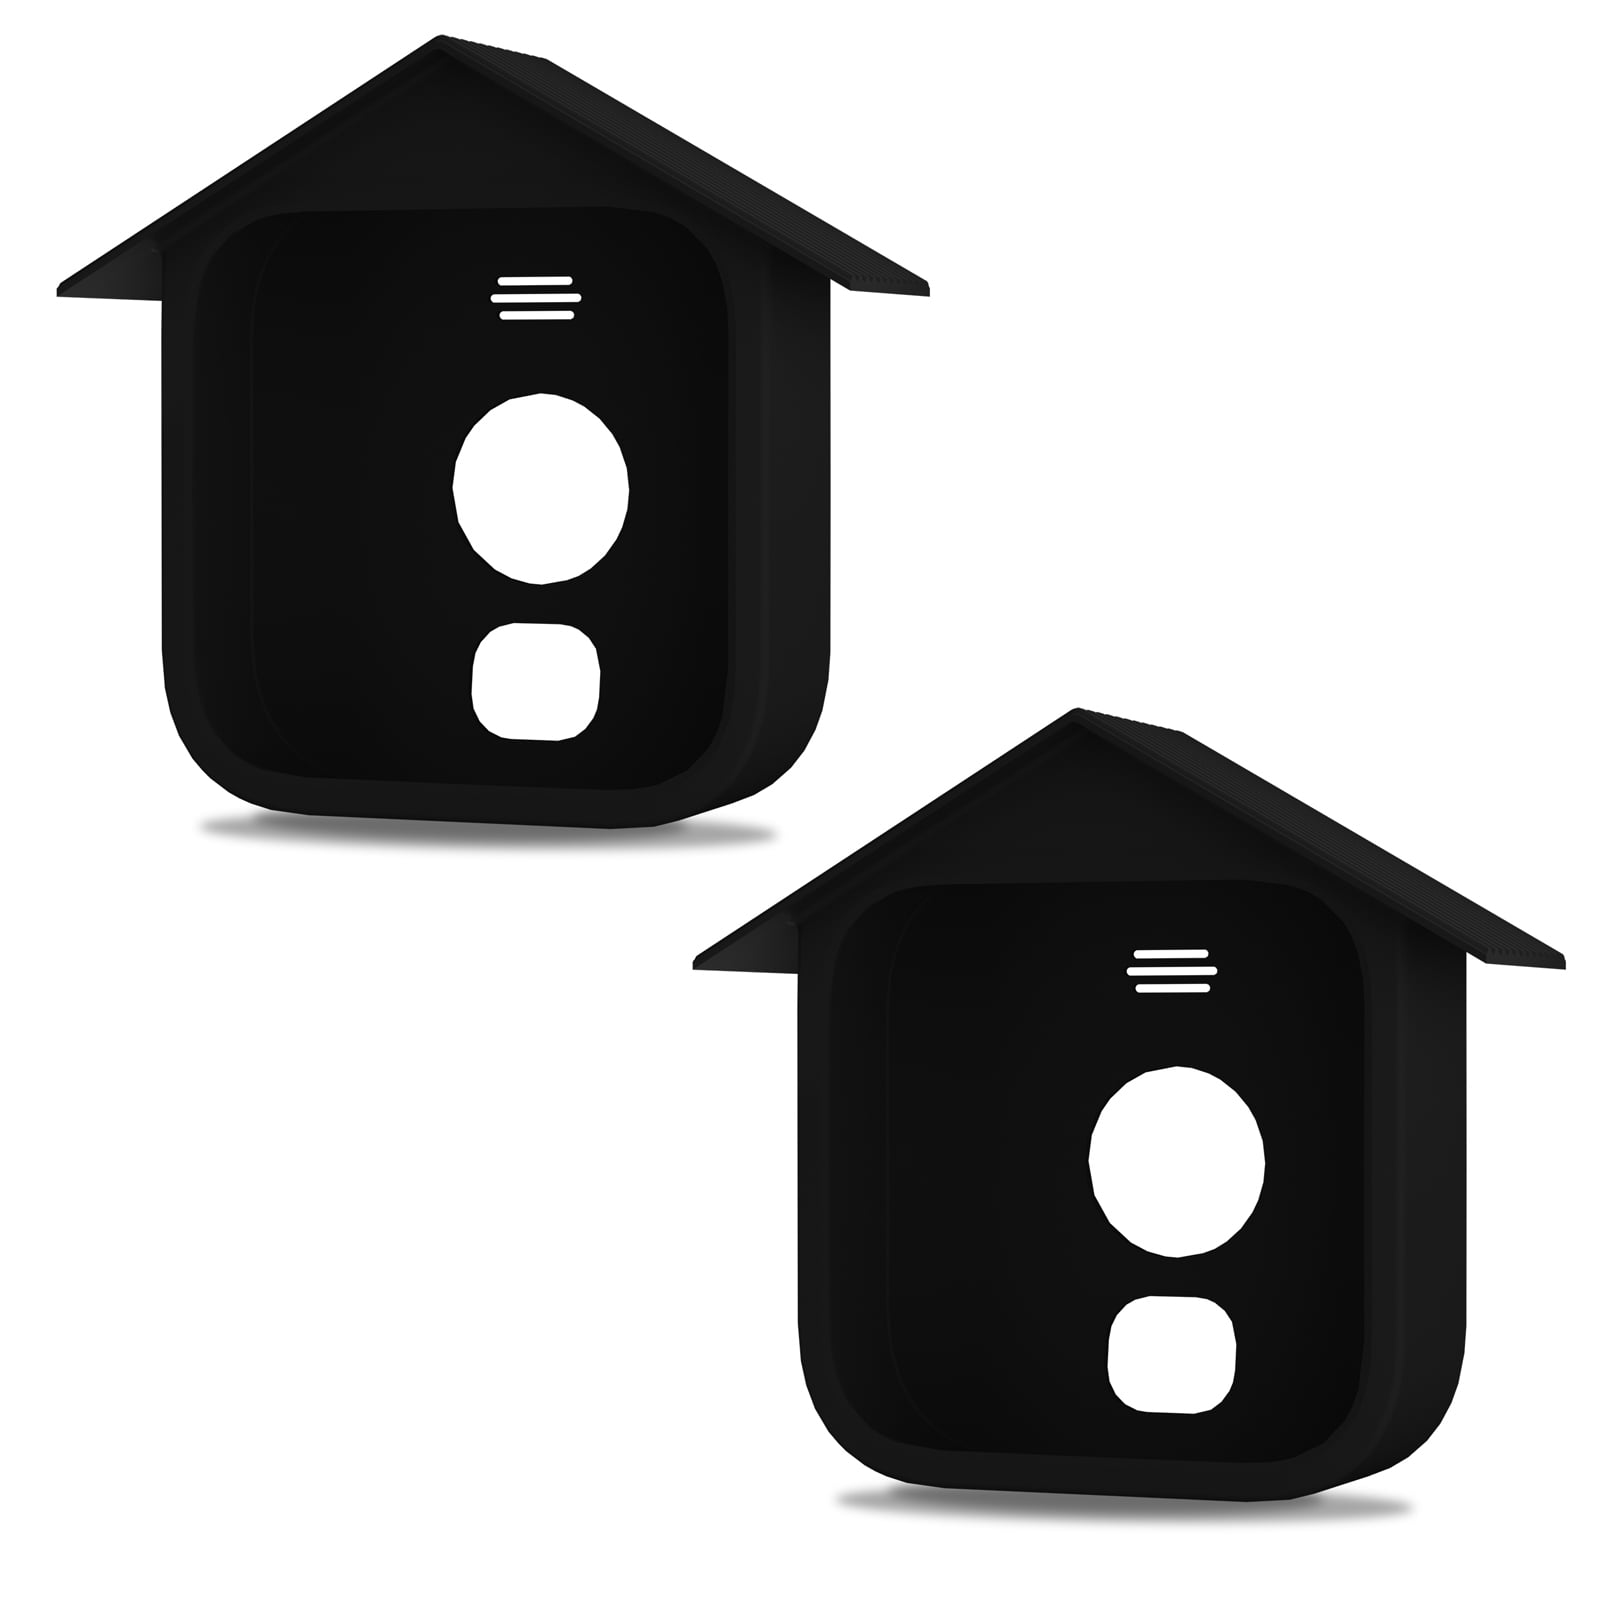 3 Pack, Brown Anti-Scratch Protective Cover for Full Protection Blink Outdoor Camera Cover,Birdhouse Case for New Blink Outdoor Security Camera-HOLACA Silicone Skin for Blink Camera